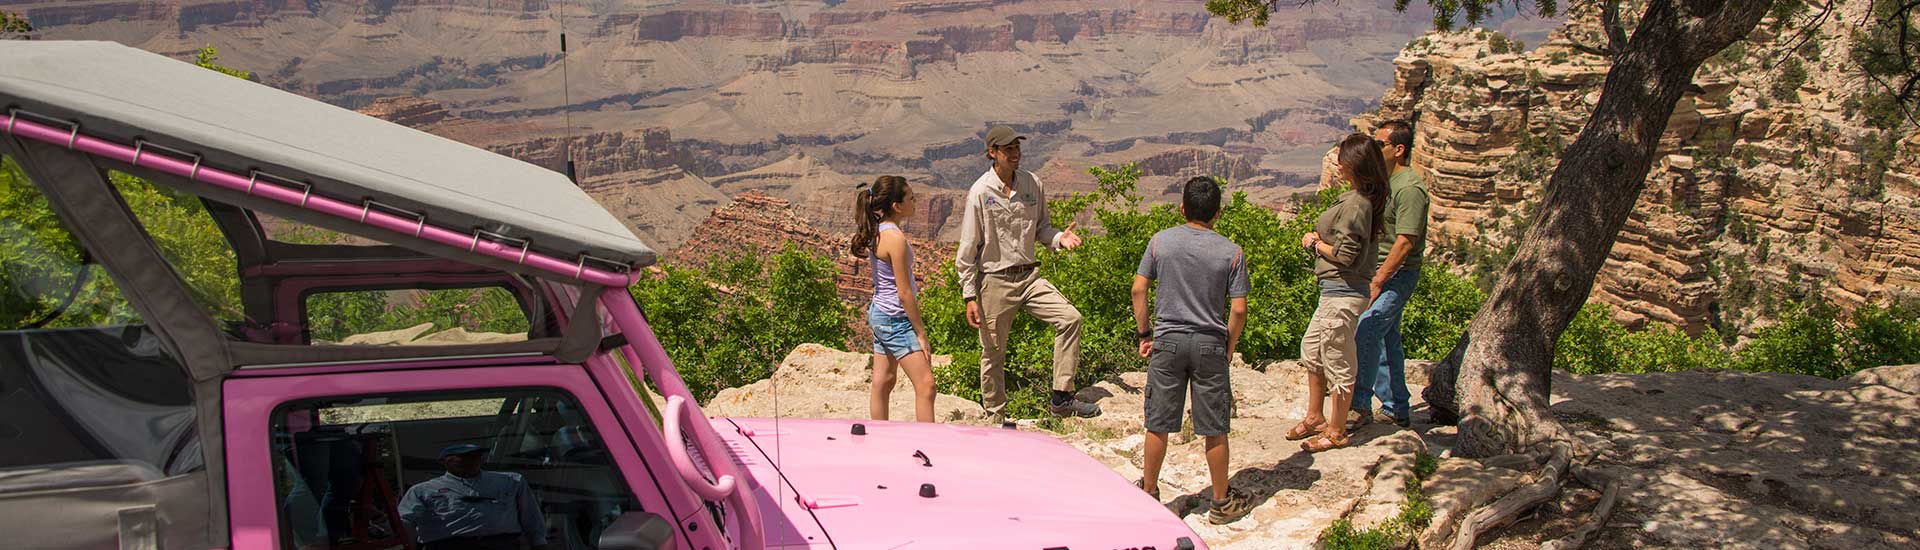 Desert View Sunset tour guests with guide overlooking the Grand Canyon's South Rim with Jeep® Wrangler in foreground.